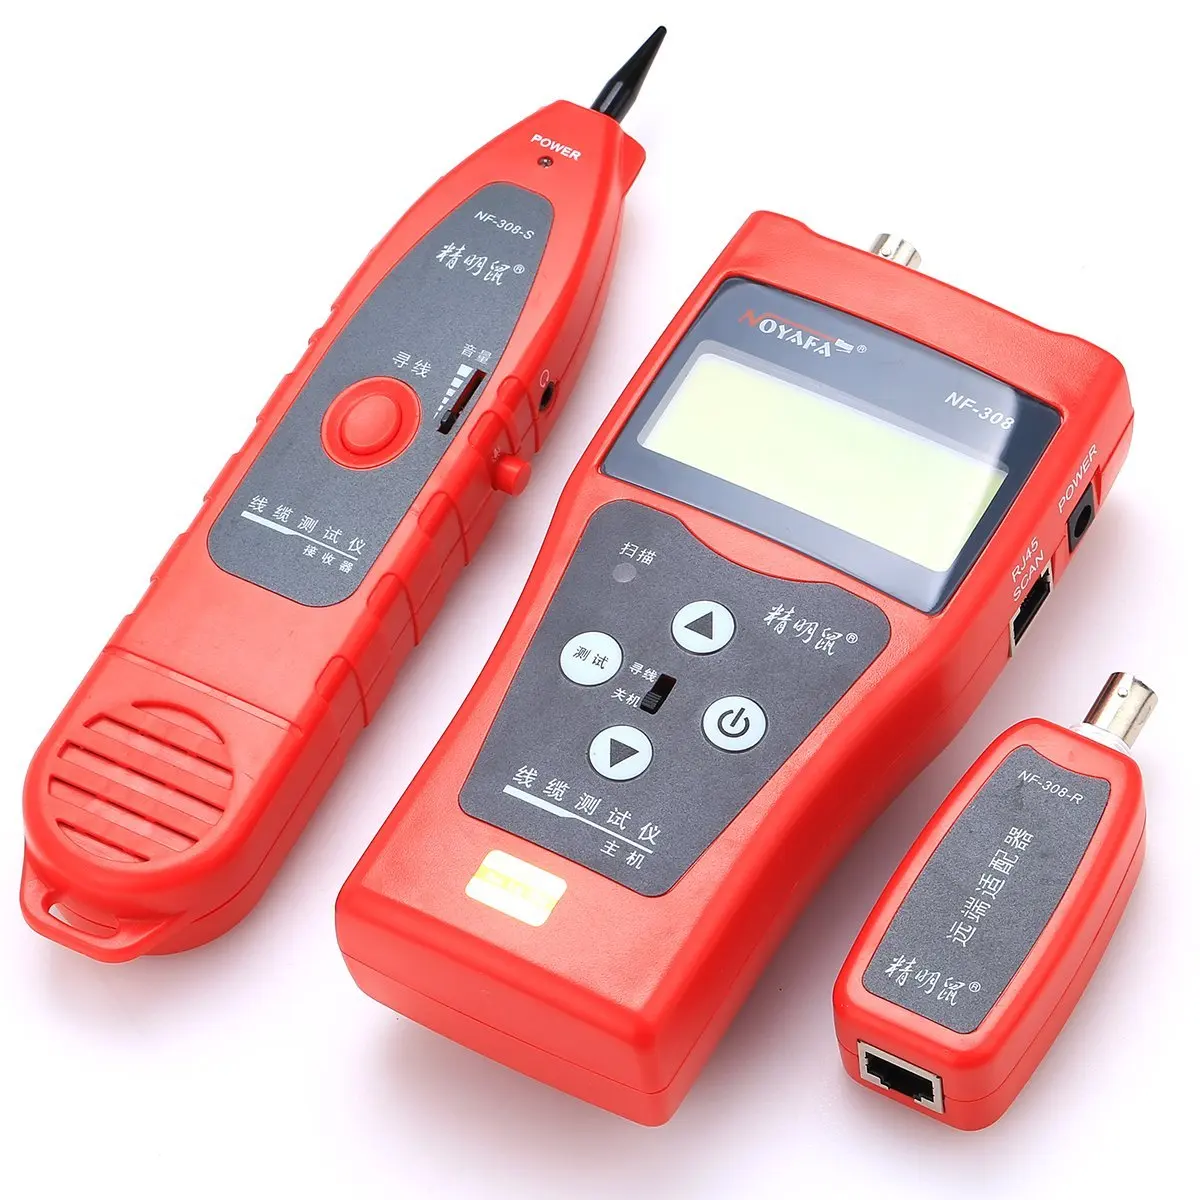 nf cable tester quotations deals cheap rj45 identifier locator lan bnc rj11 tracker telephone remote wire length network audio